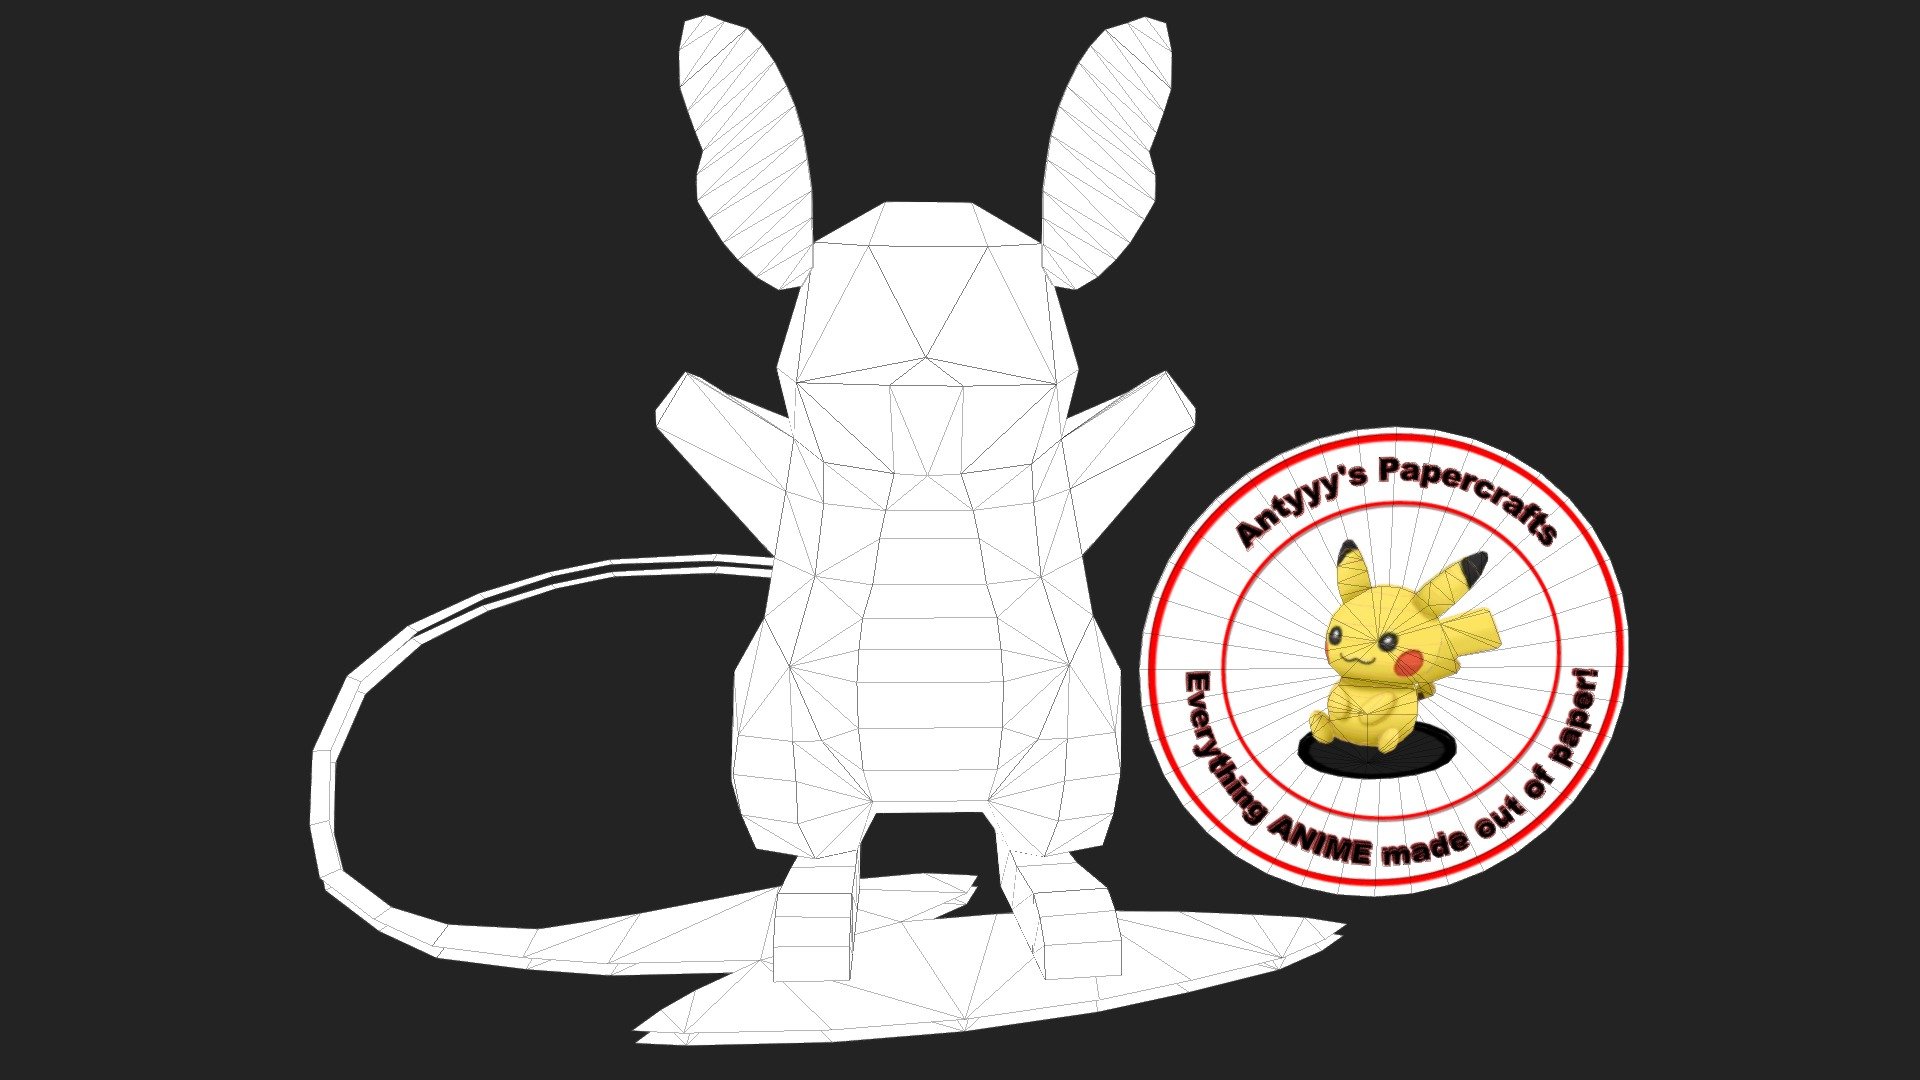 My papercraft design of a chibi alolan Raichu (from the Pokemon game Sun &amp; Moon).

The 3D model is a preview of my FREE papercraft, that you can download here: 

https://www.deviantart.com/antyyy/art/Chibi-alolan-Raichu-papercraft-FREE-download-631072030

or here (along with all of my other free papercrafts I released):

https://www.patreon.com/antyyyspapercrafts

I hope you like it, assemble it and share some pictures of it as well. 

Happy crafting~ - Chibi alolan Raichu FREE papercraft - 3D model by Antyyy 3d model